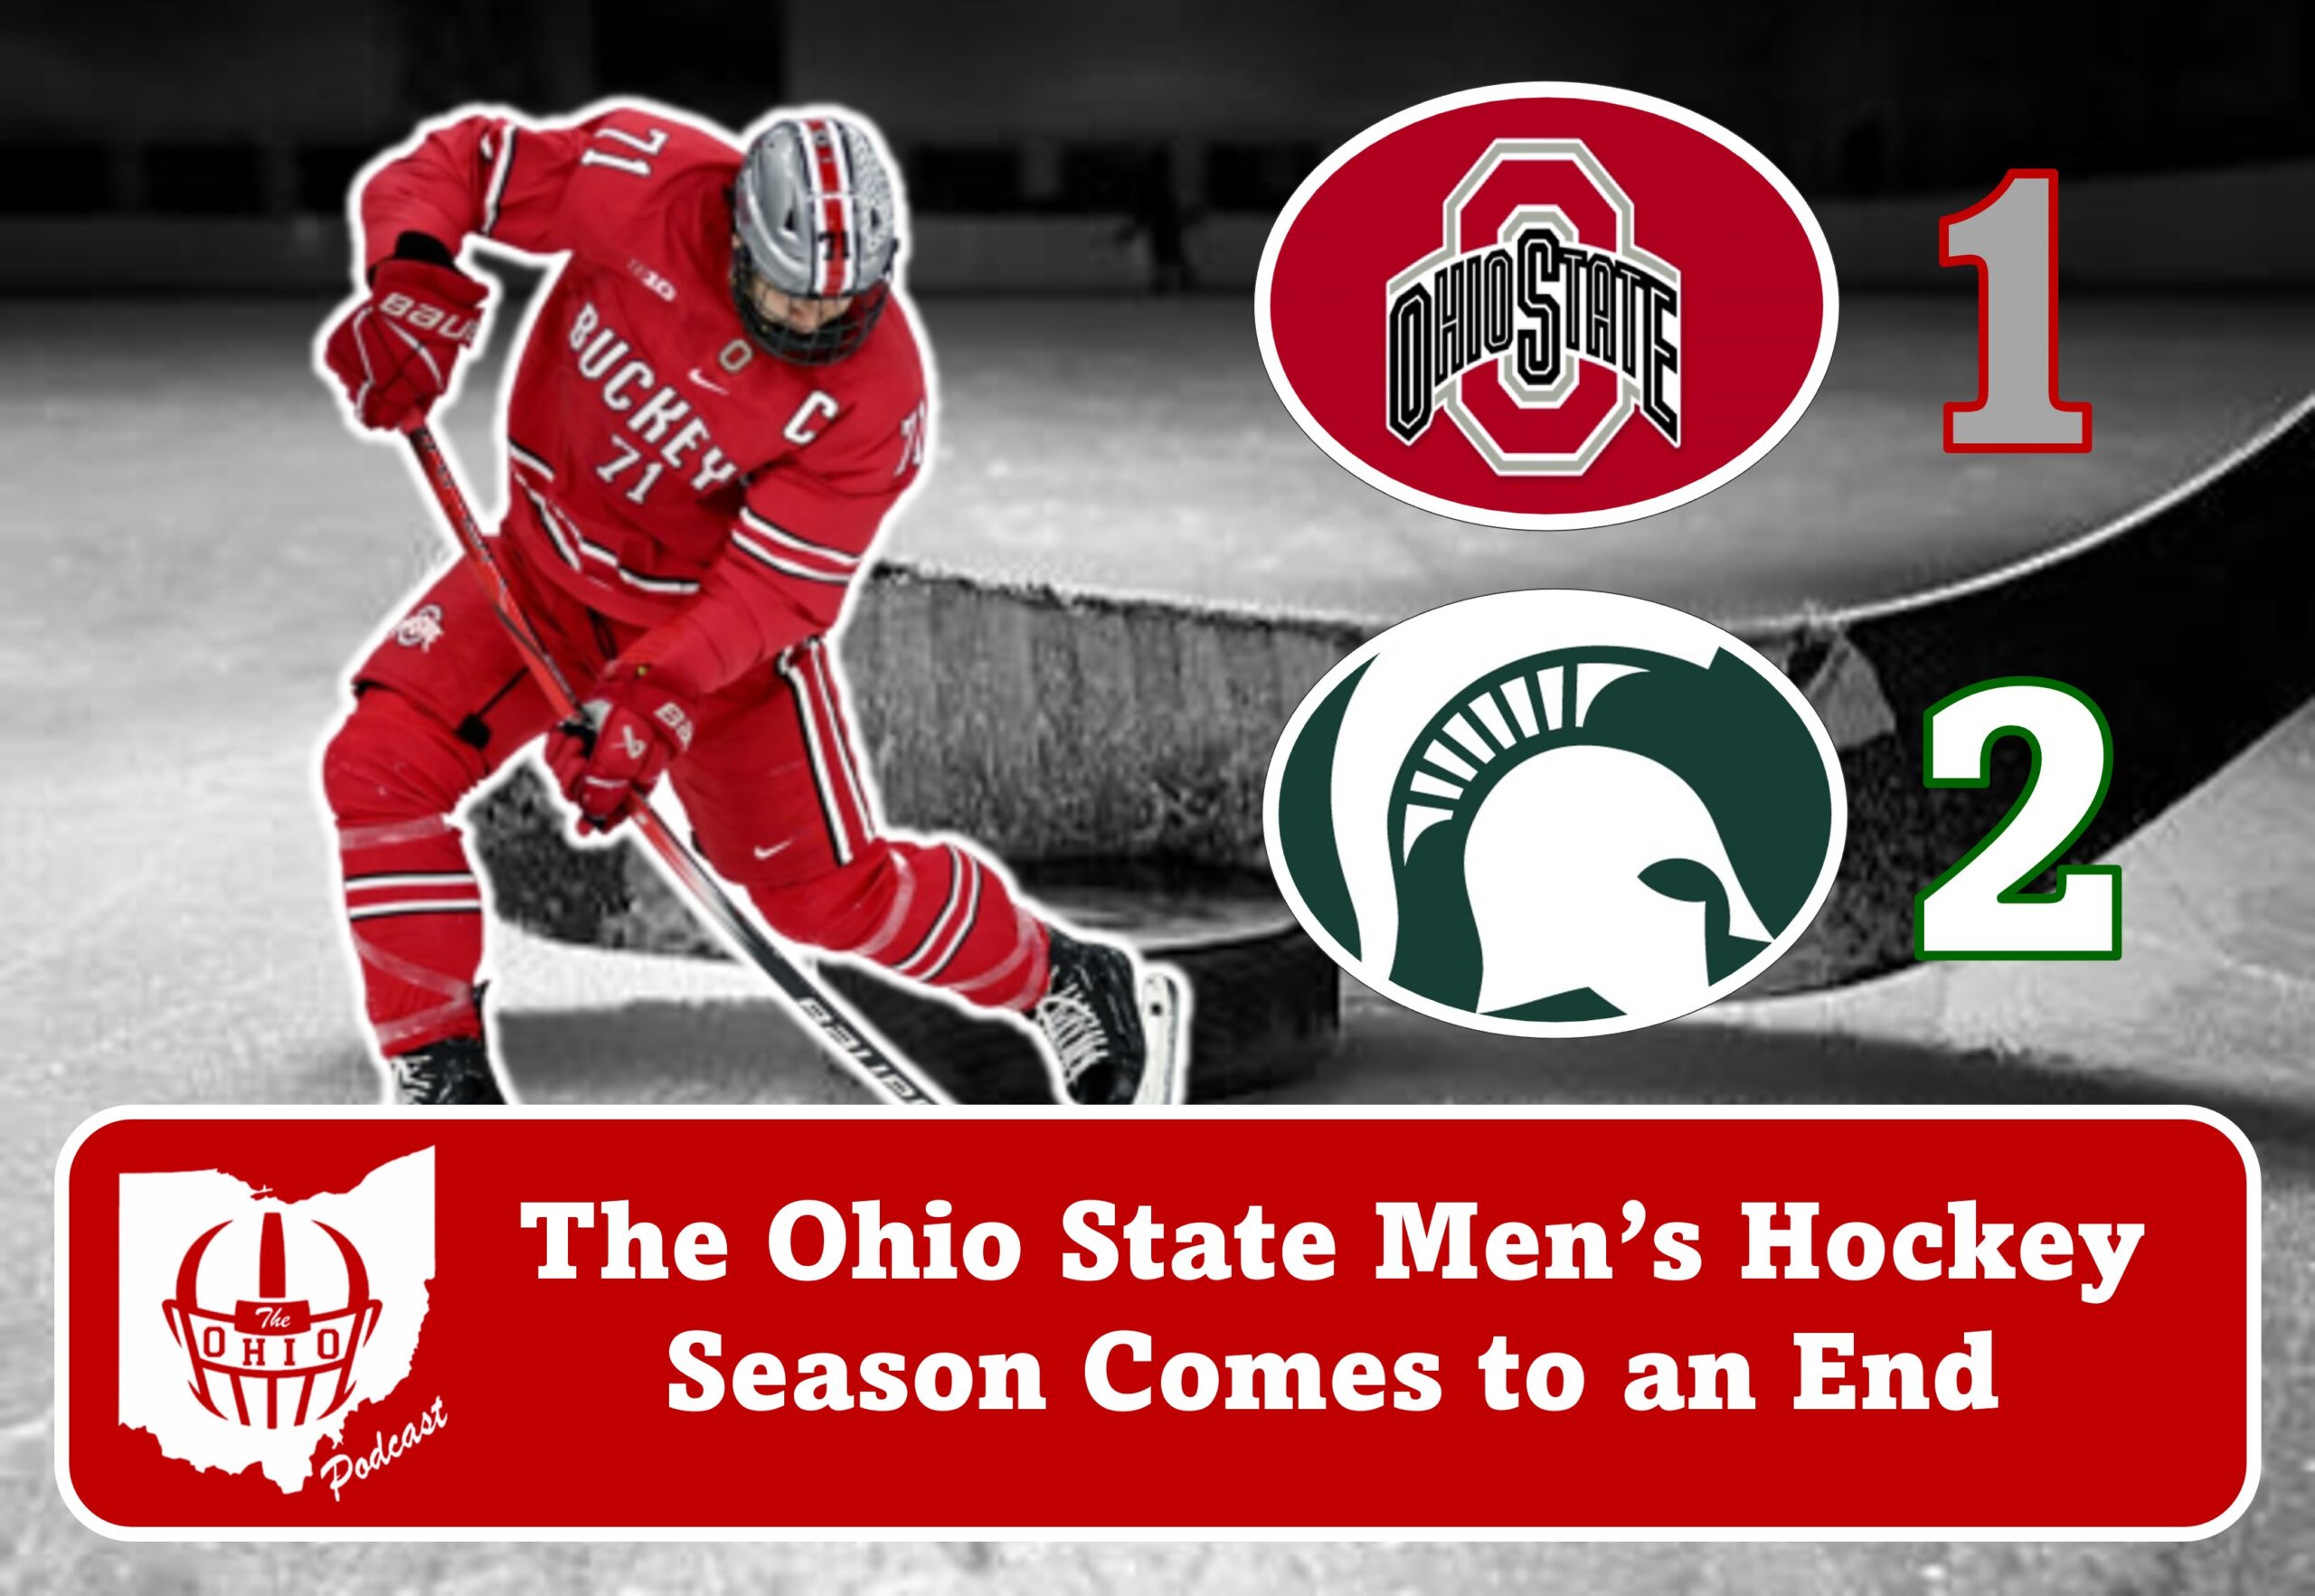 The Ohio State Men's Hockey Season Comes to an End